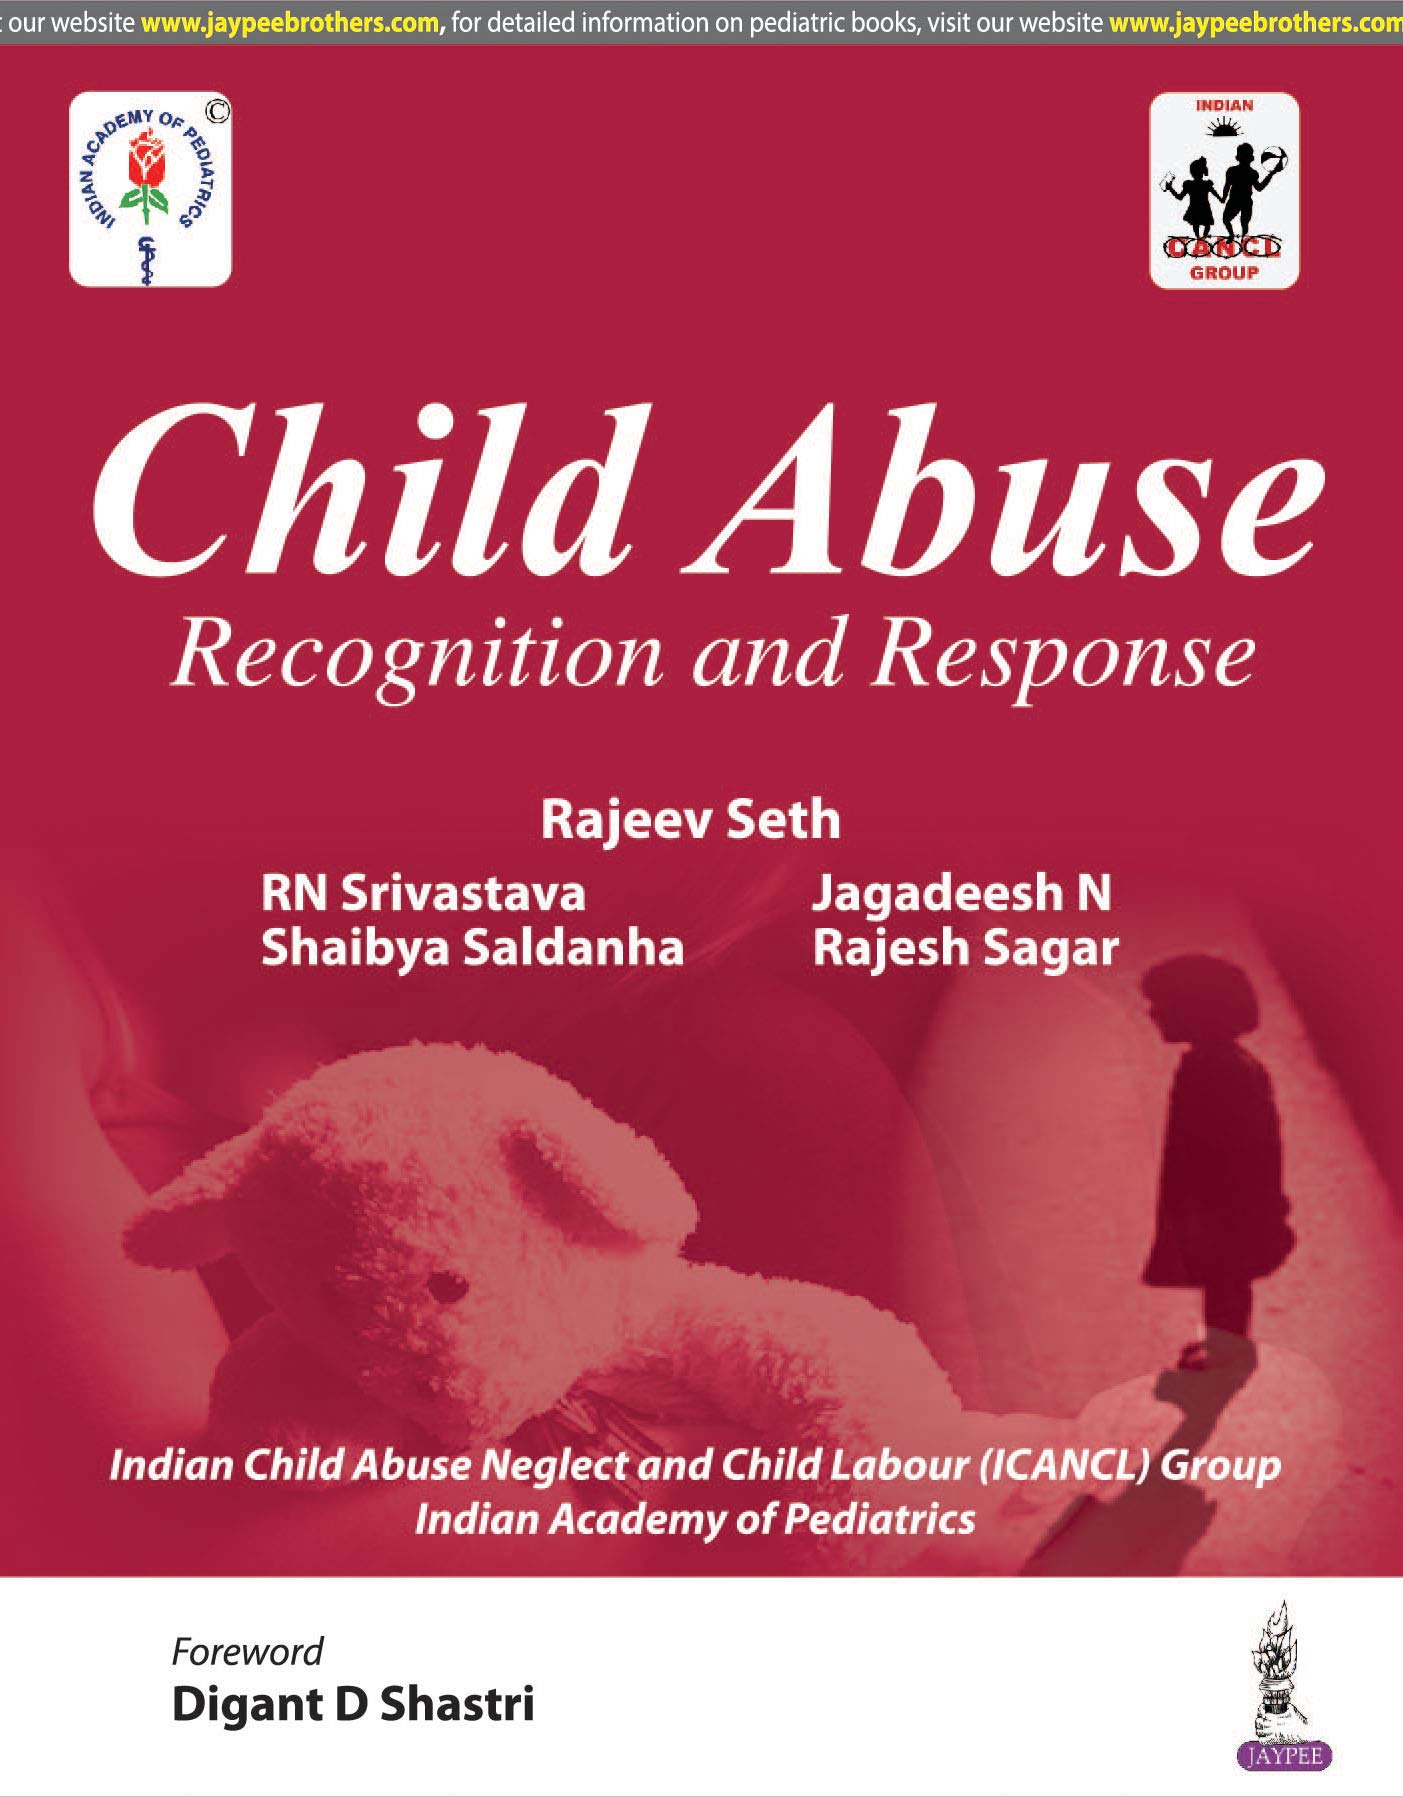 Child Abuse: Recognition And Response
